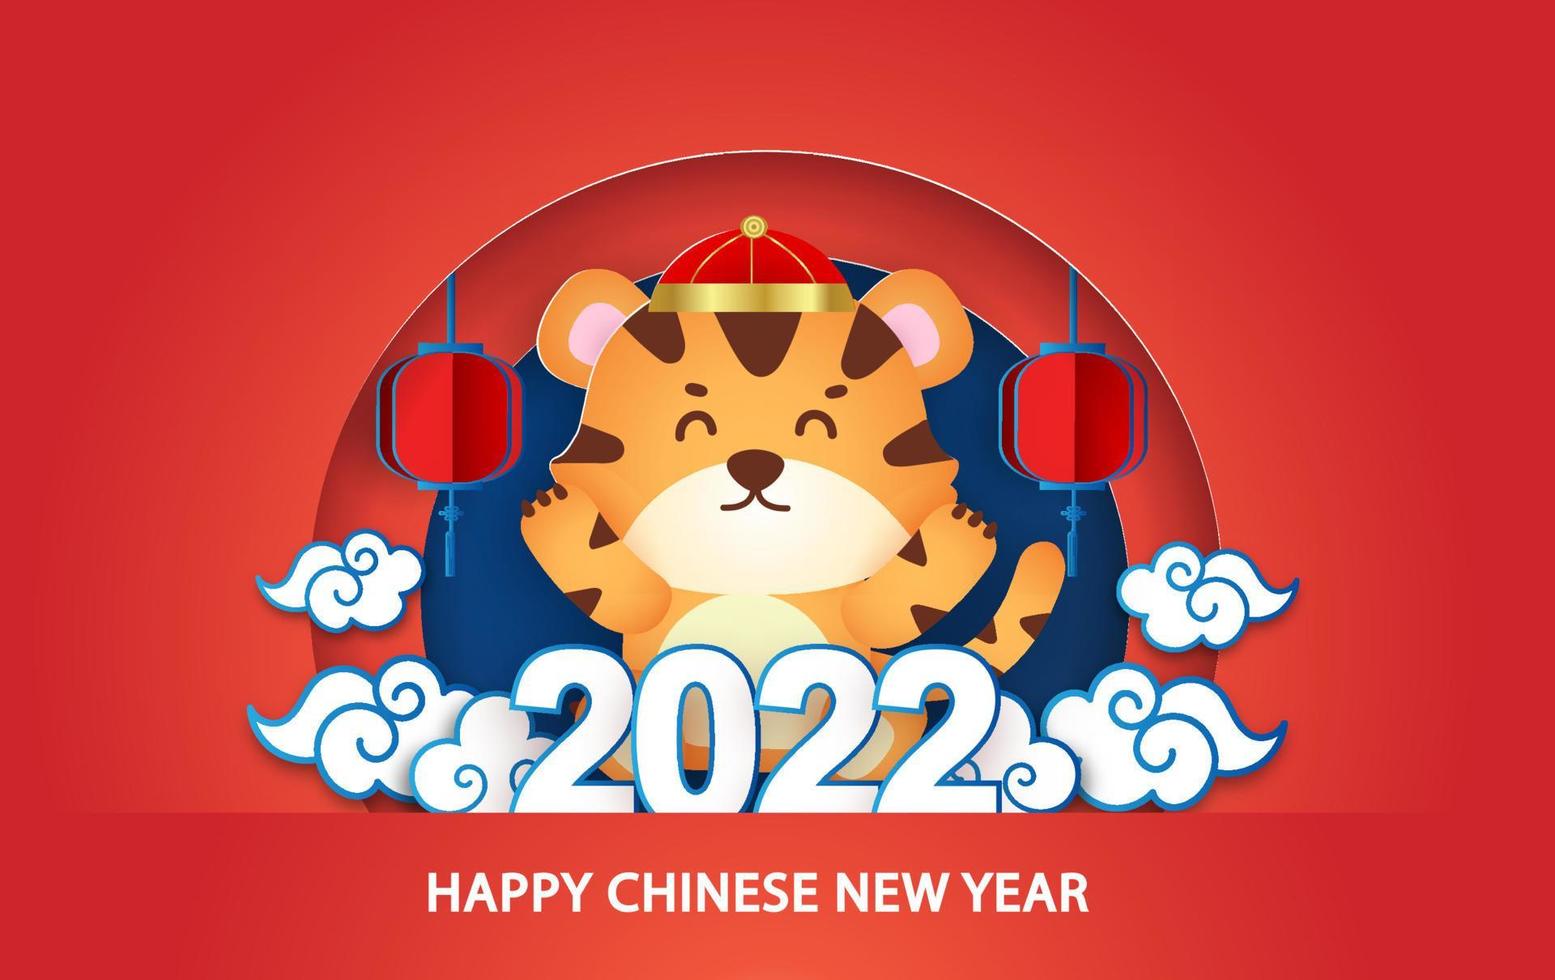 Chinese new year 2022 year of the tiger greeting card in paper cut style vector